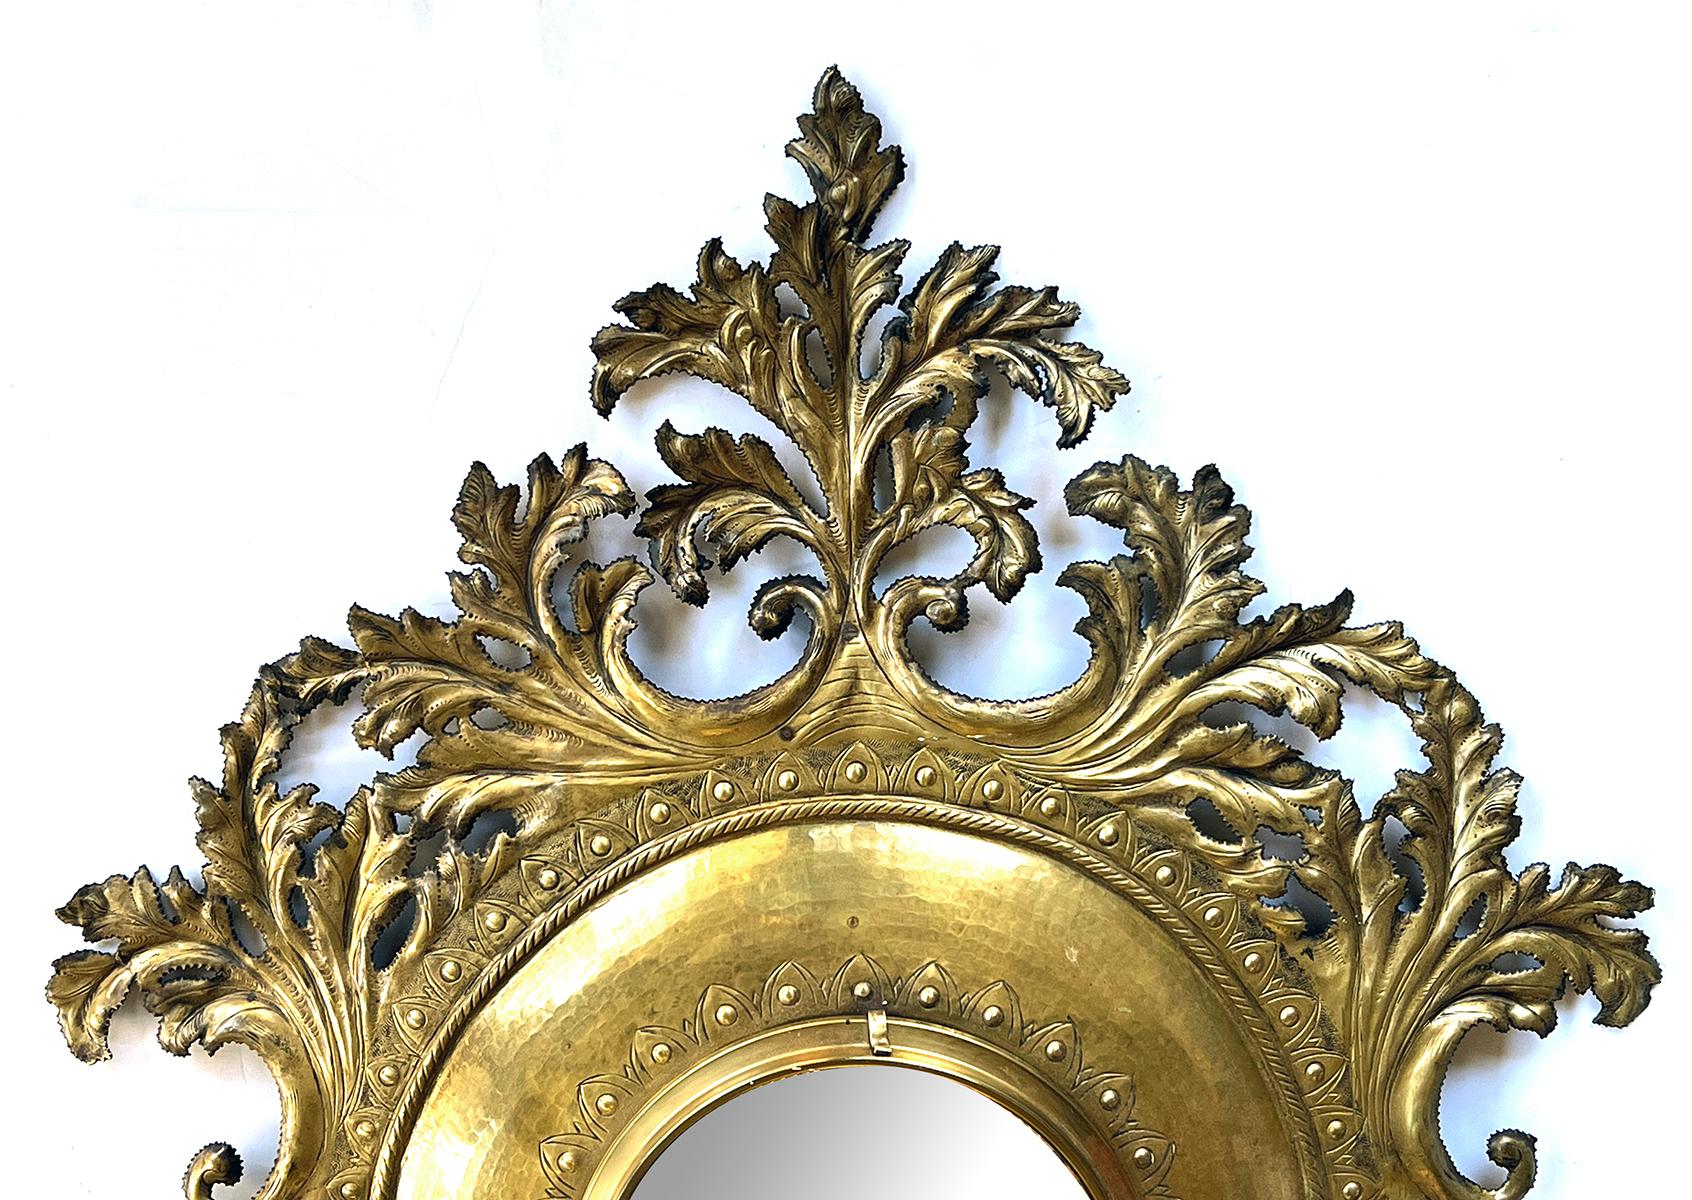 Centering a convex mirror within a brass frame surrounded by lively cut brass foliage.